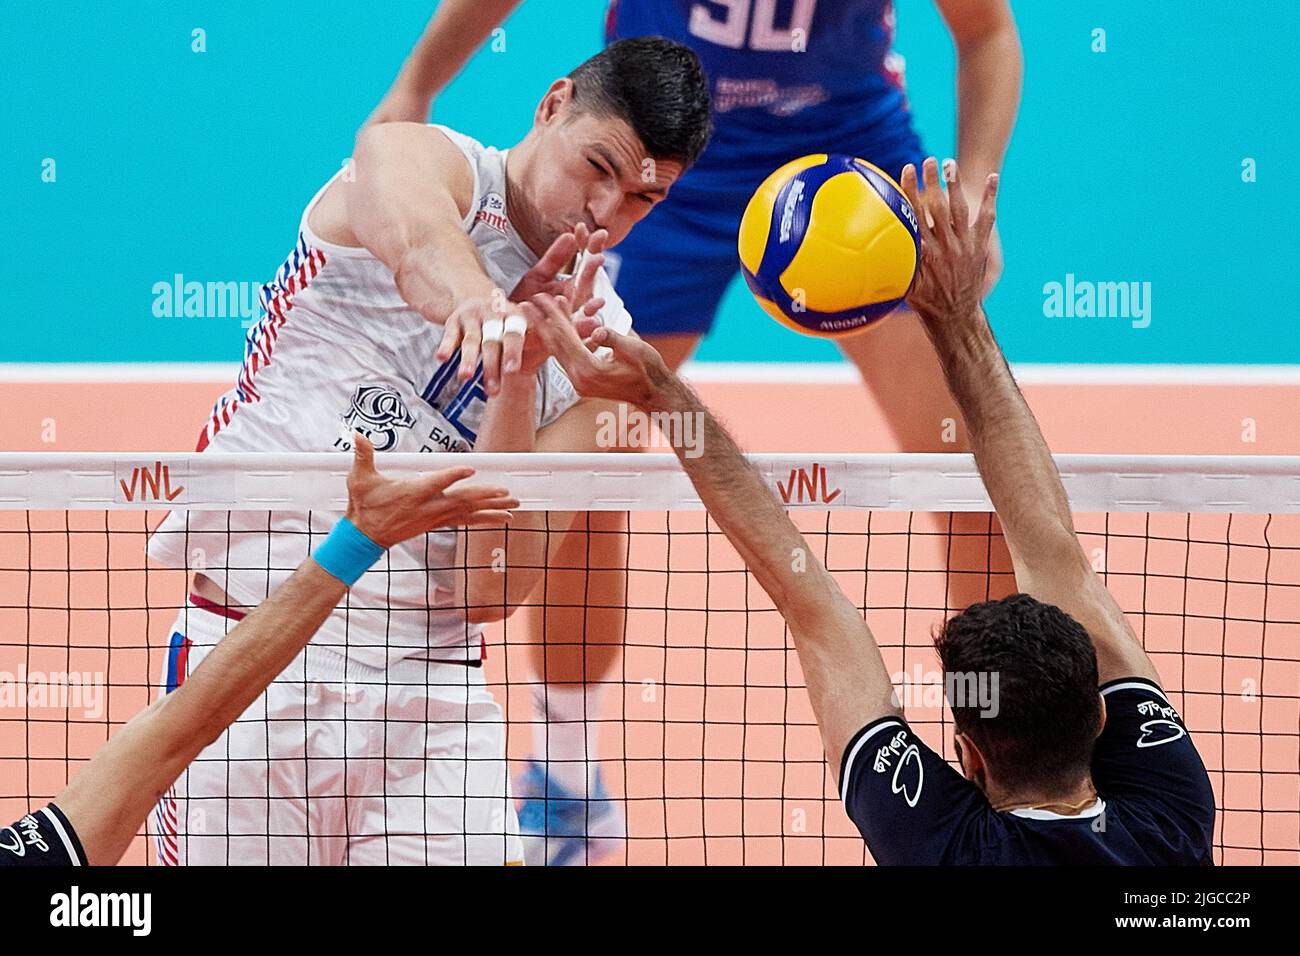 Gdansk, Poland. 09th July, 2022. Ebadipour Ghara H. Milad (R) of Iran and Marko Podrascanin (L) of Serbia during the 2022 men's FIVB Volleyball Nations League match between Iran and Serbia in Gdansk, Poland, 09 July 2022. Credit: PAP/Alamy Live News Stock Photo